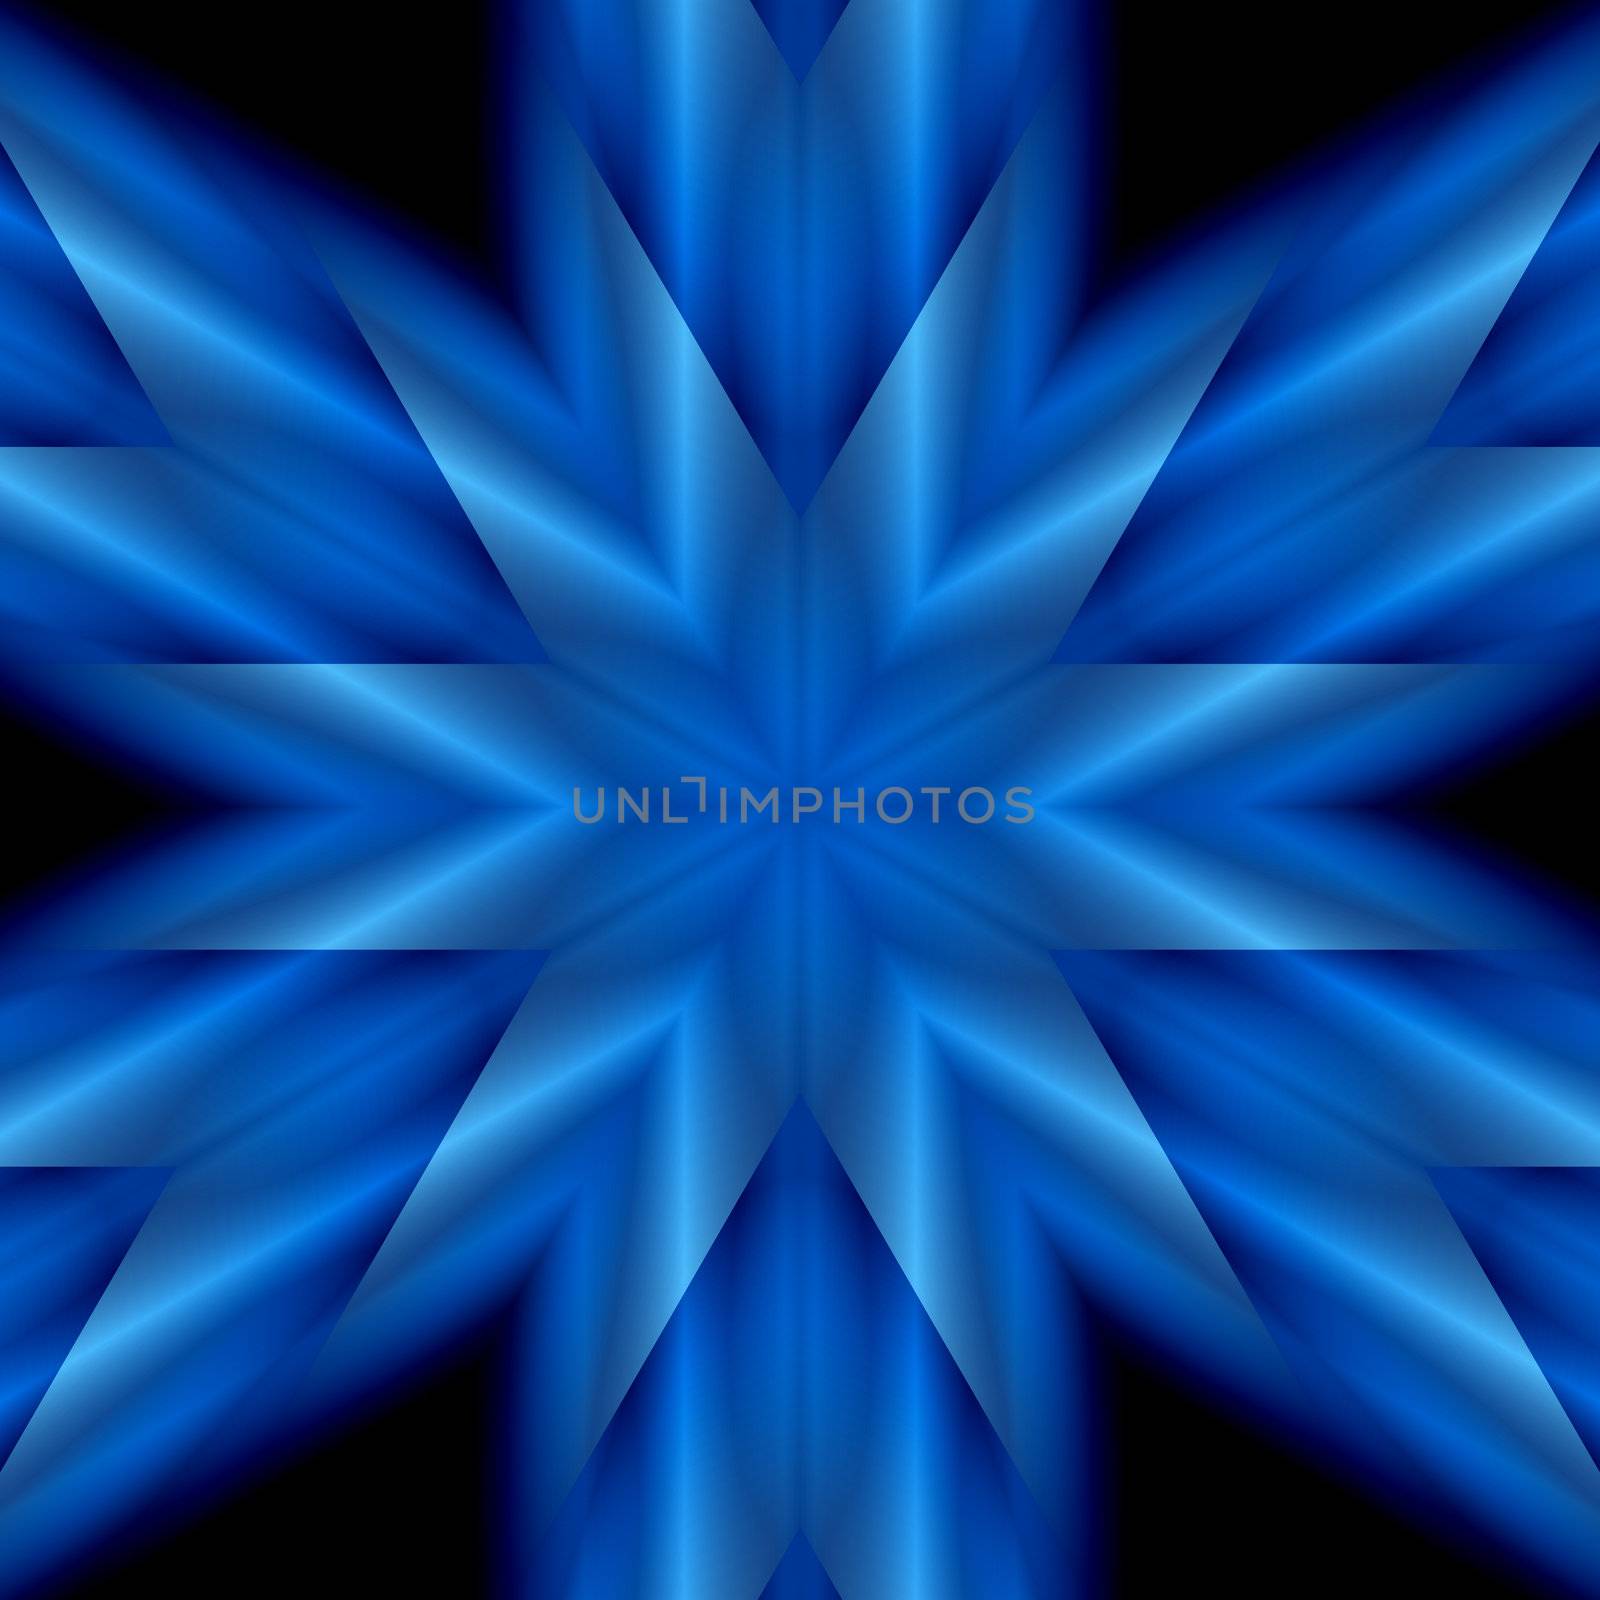 An abstract illustration of a six pointed holiday star.